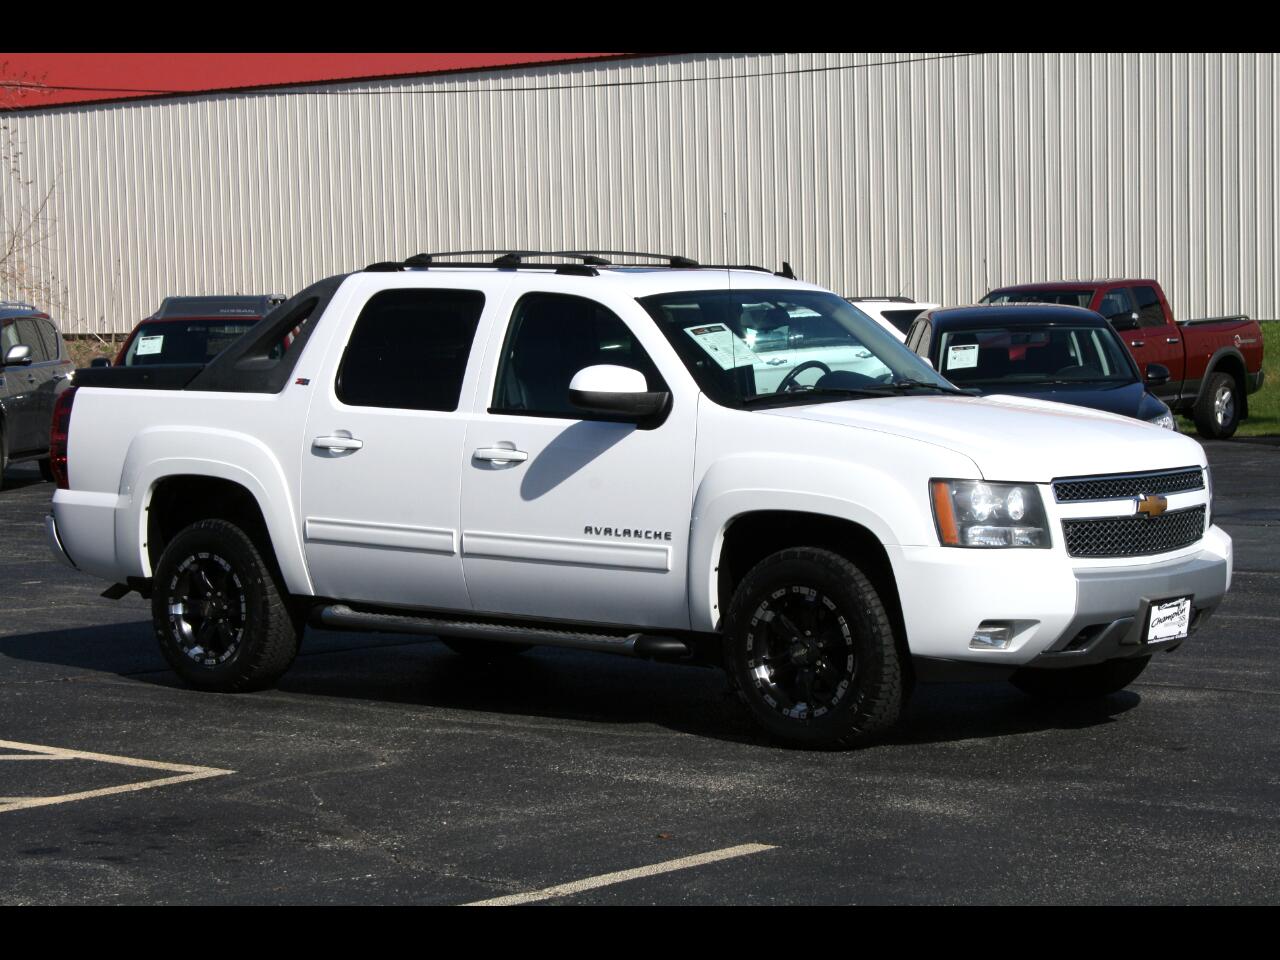 Chevrolet Avalanche LT 4WD 2012